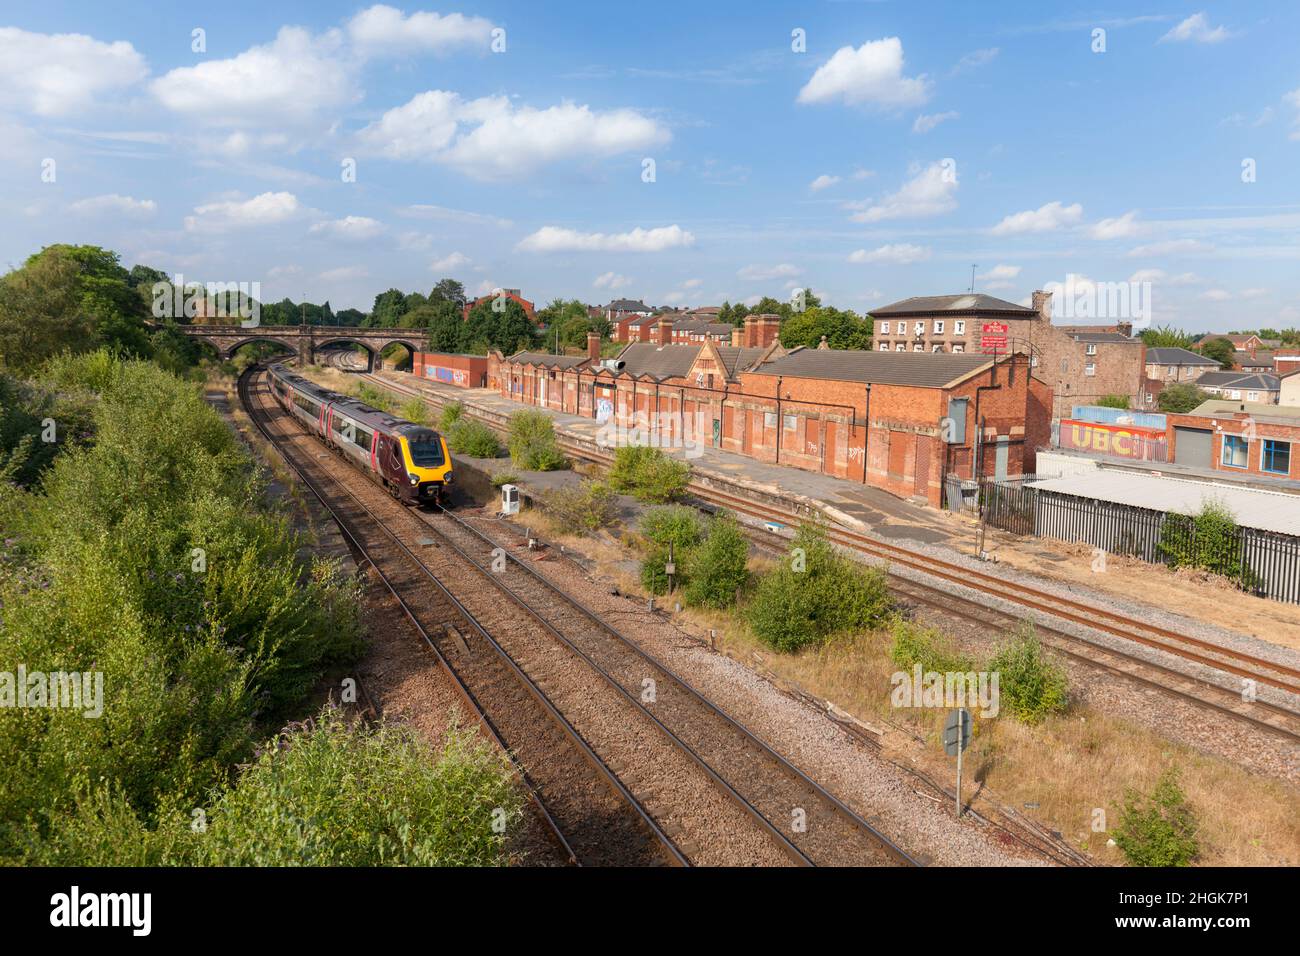 A Crosscountry Trains class 220 voyager train passing the derelict closed railway station at Rotherham Masborough Stock Photo